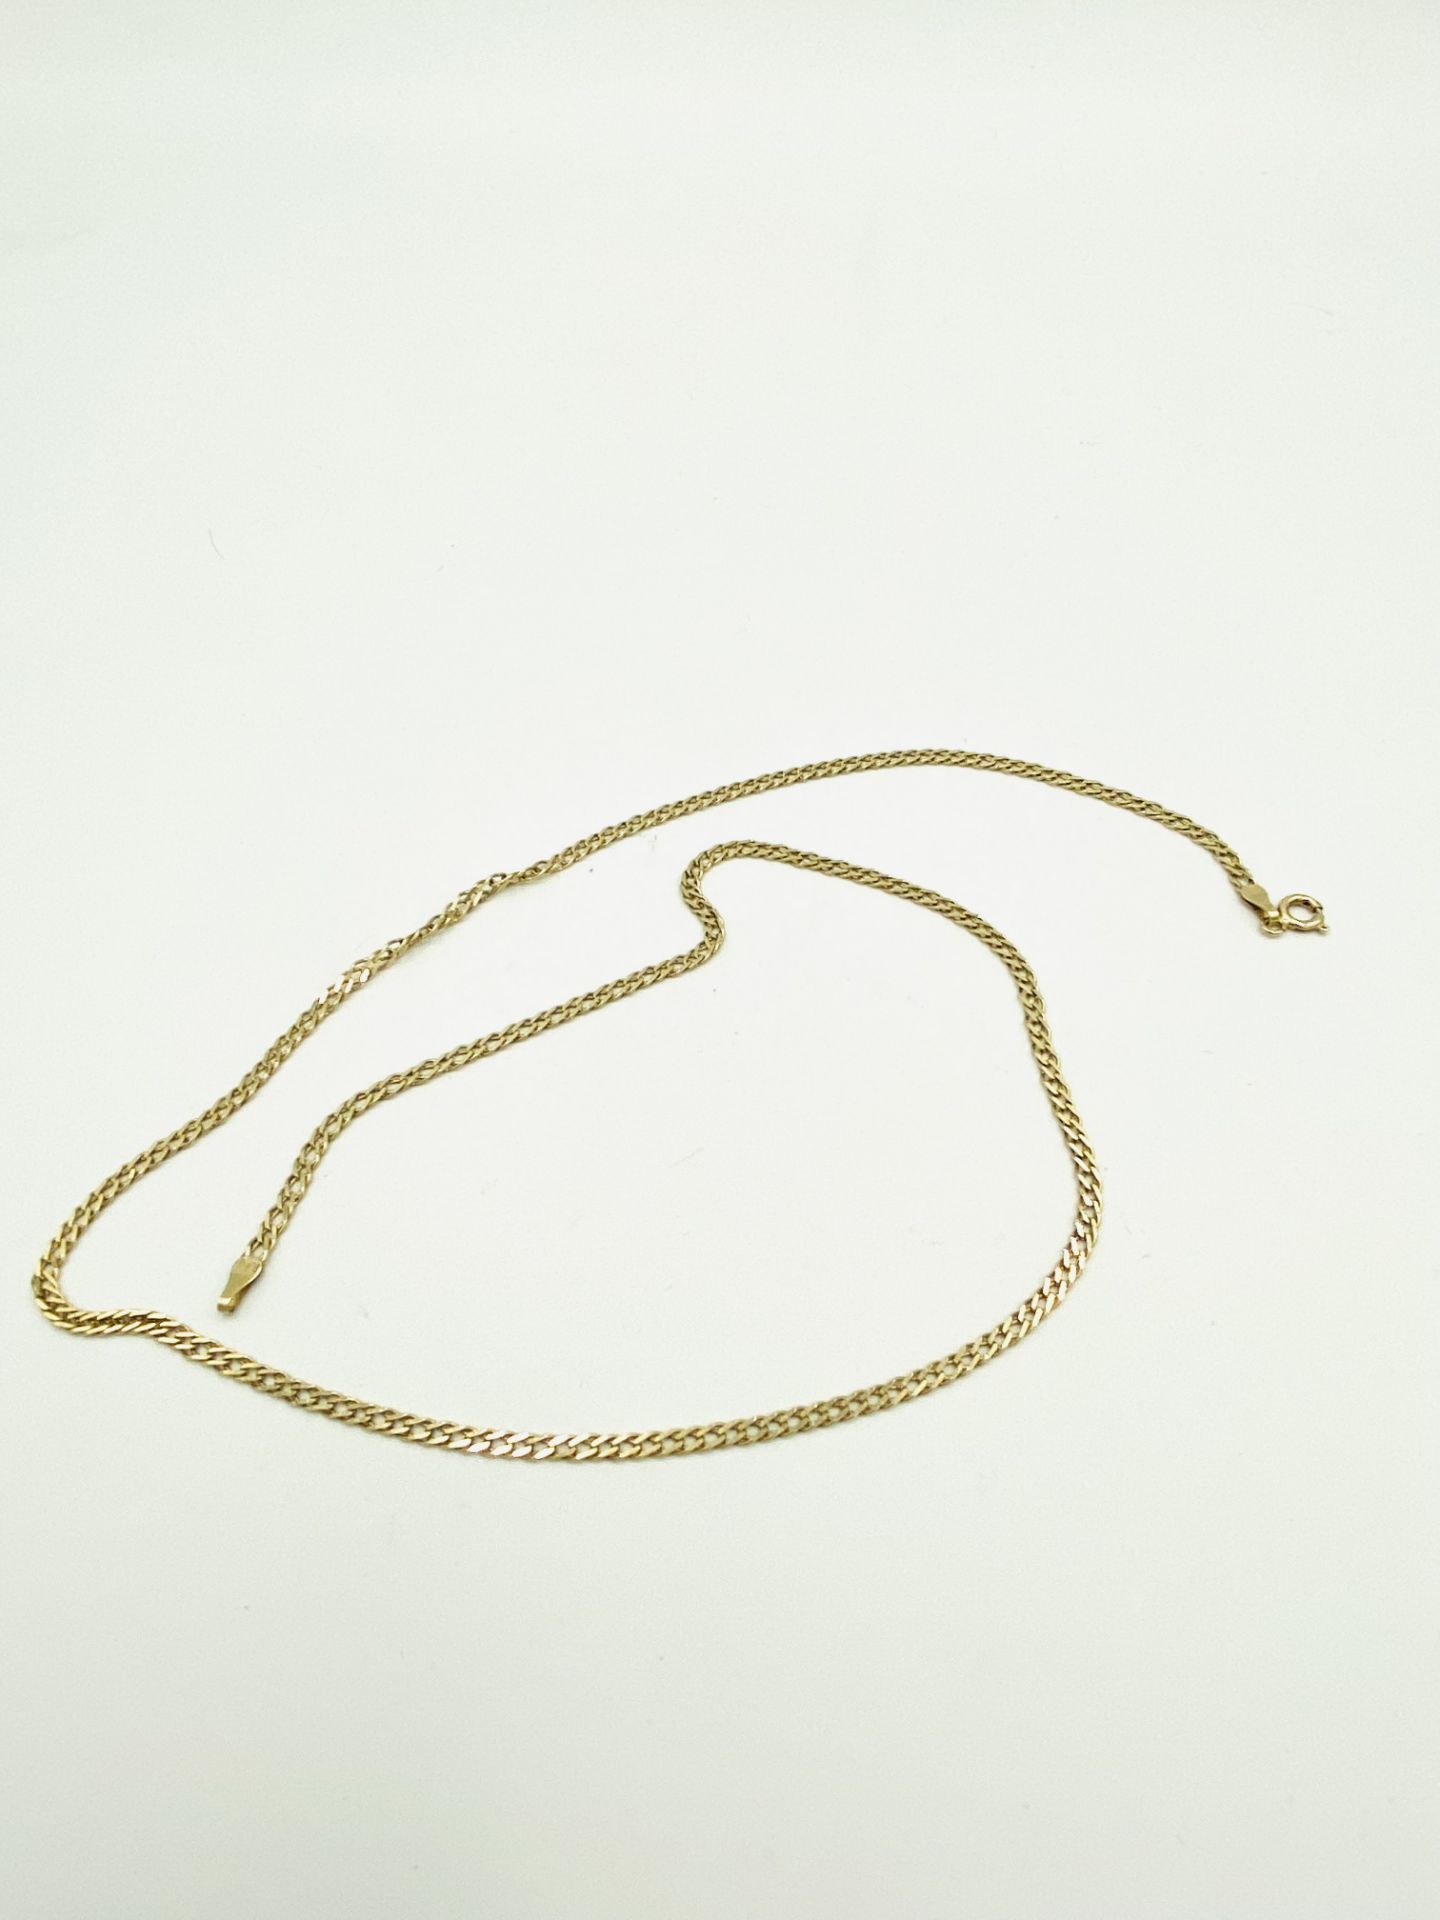 9ct gold flat chain. - Image 4 of 4